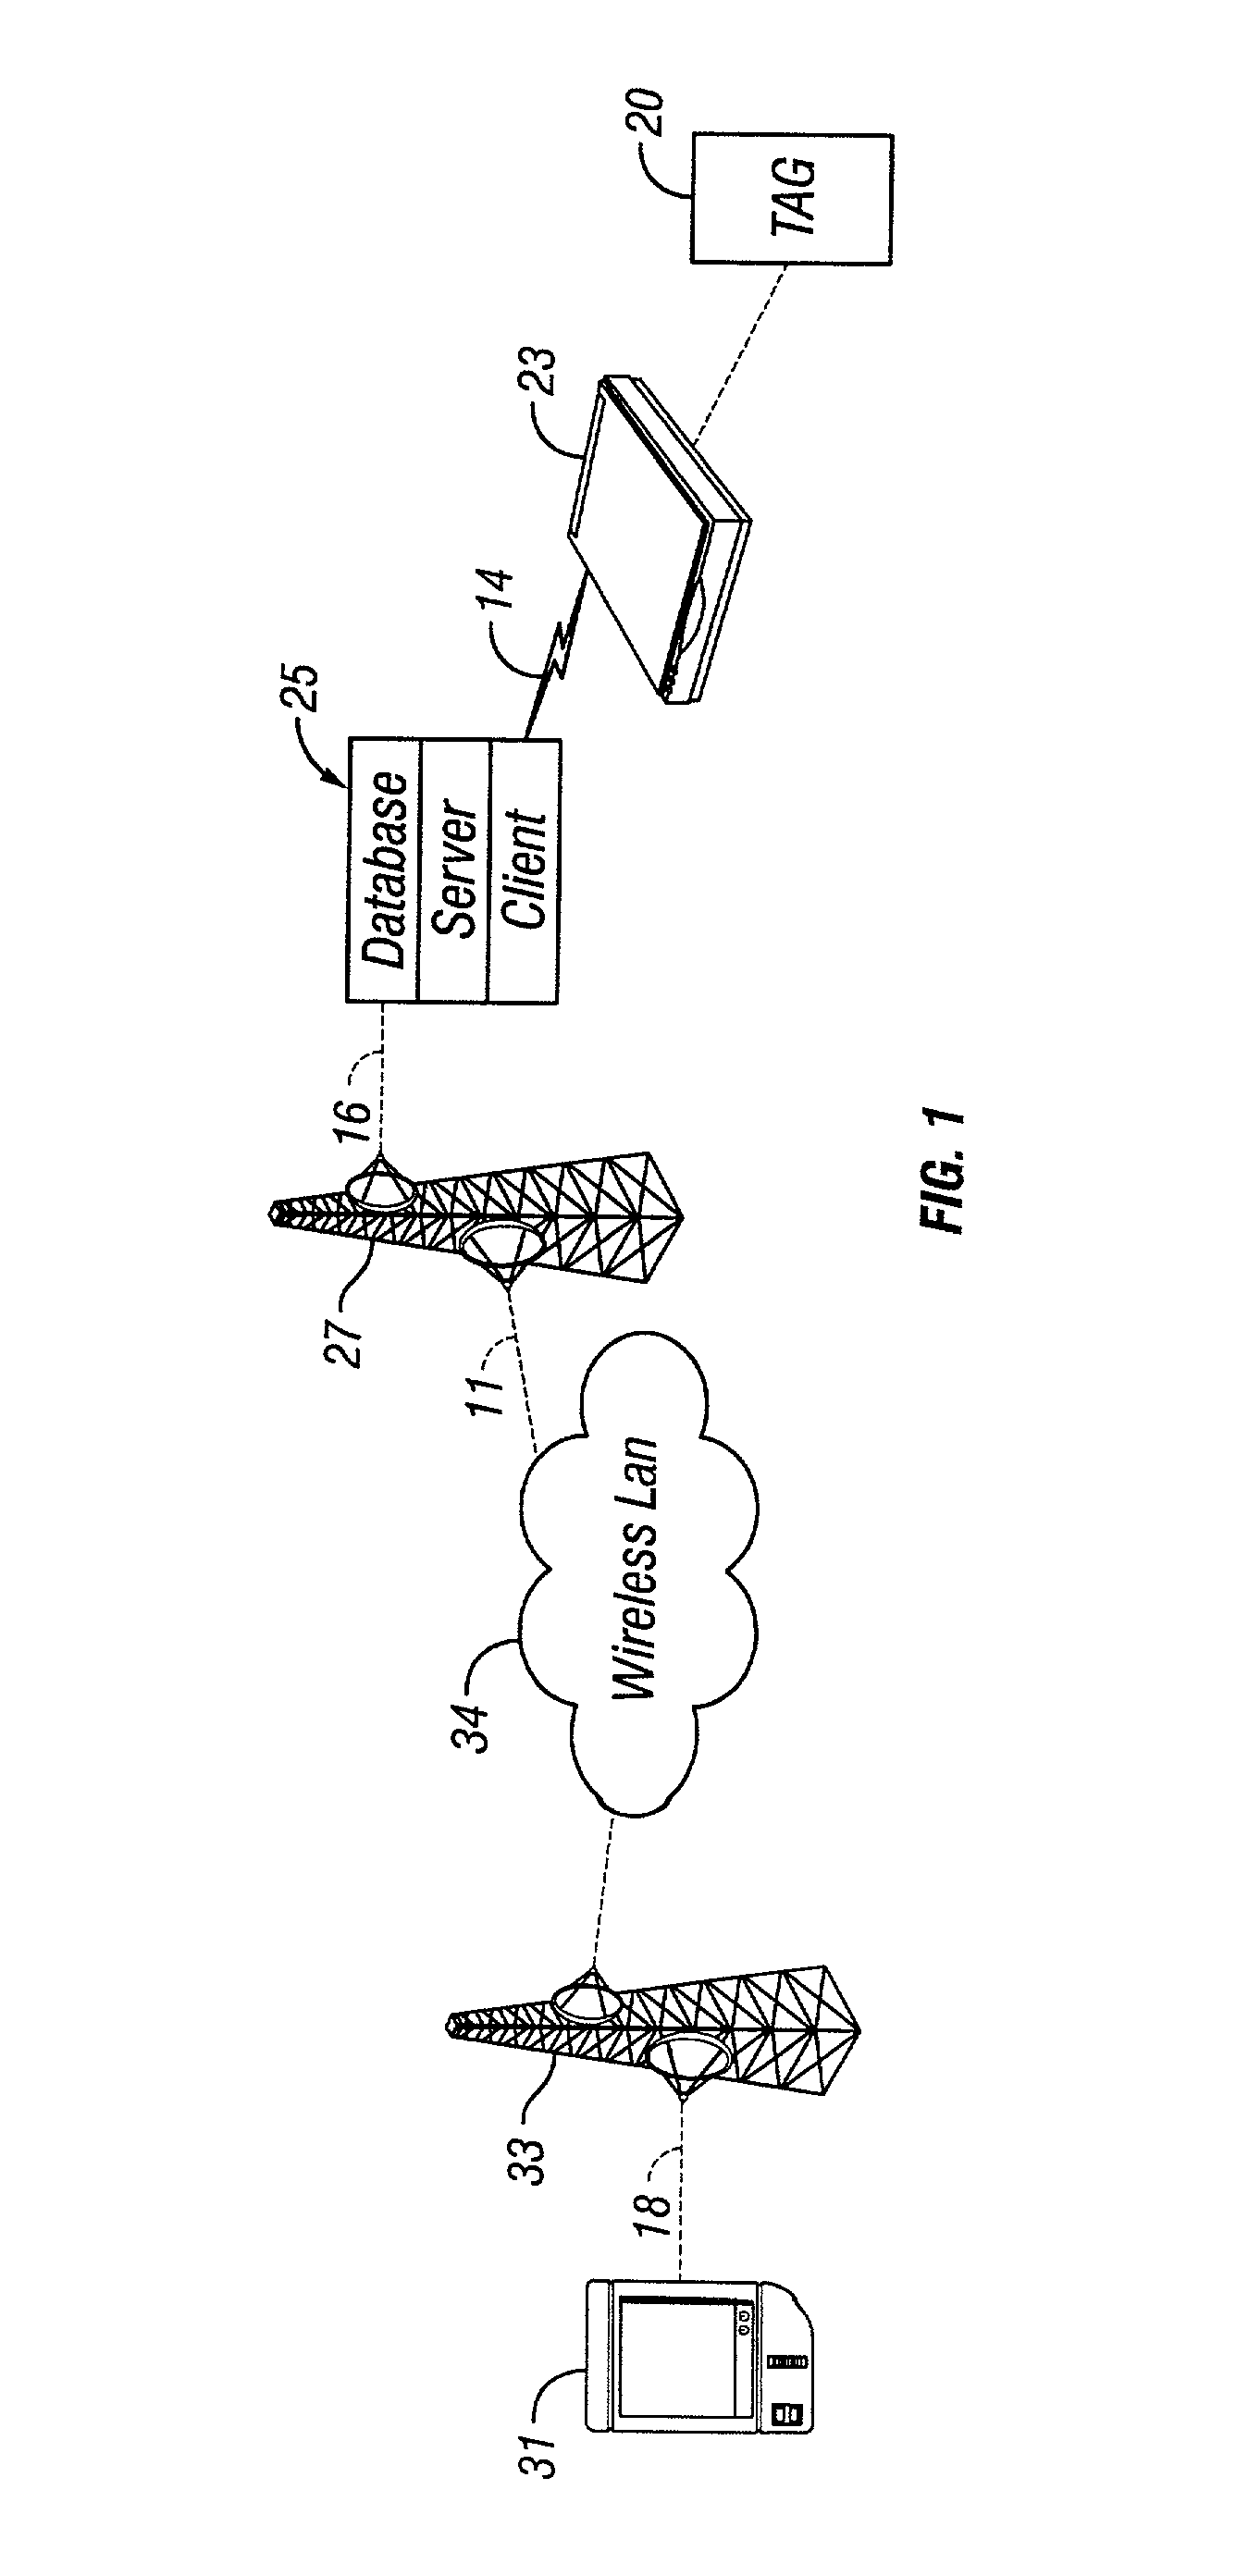 Method and apparatus for facilitating personal attention via wireless networks